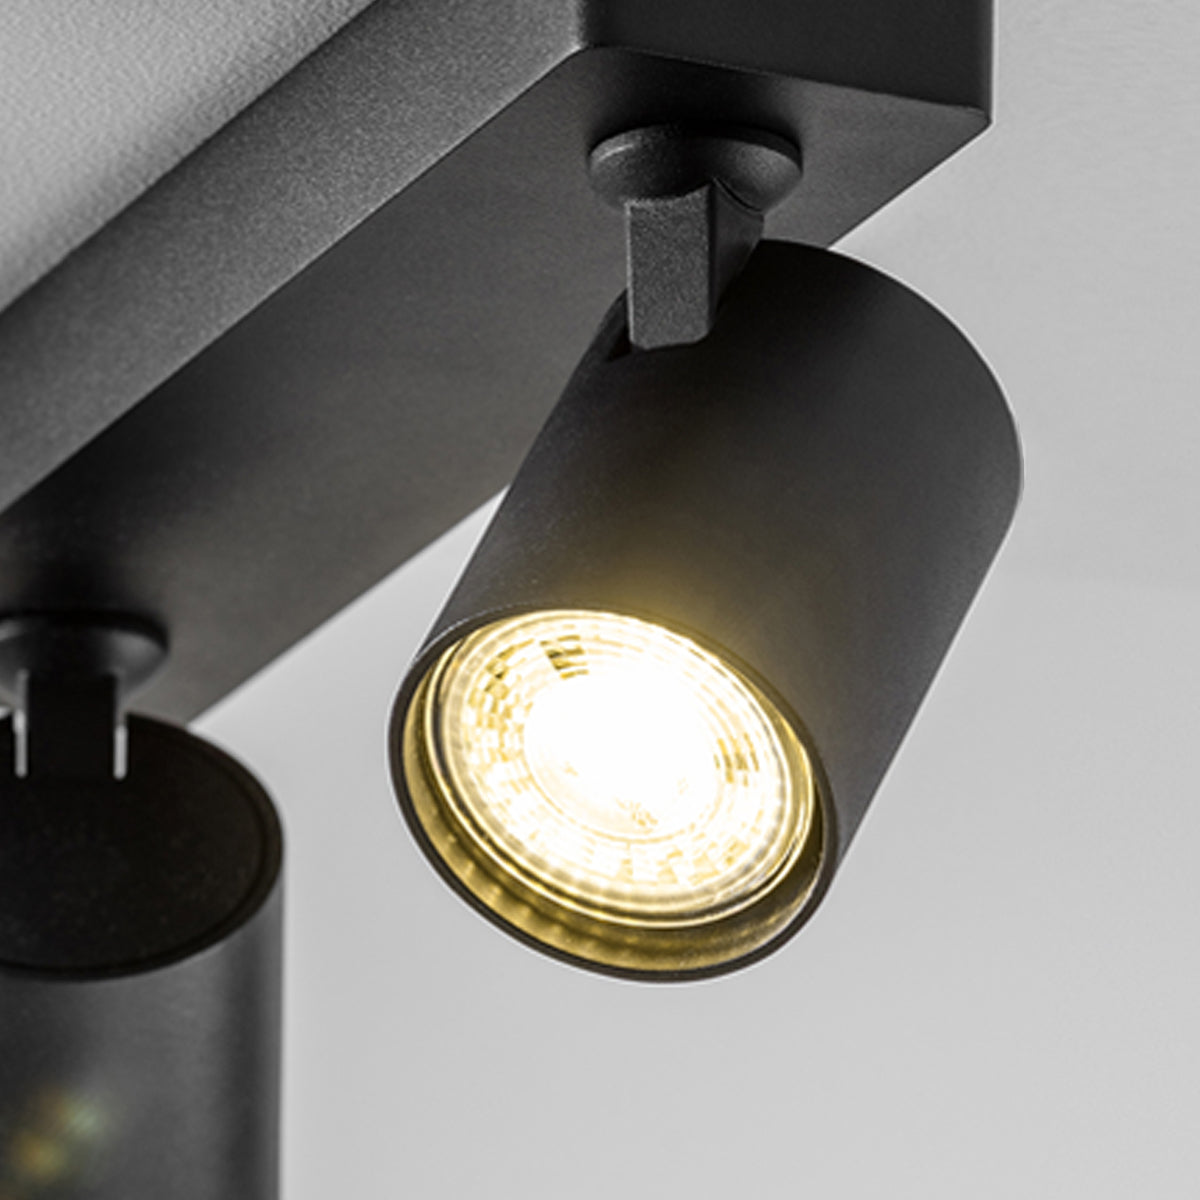 The black Nell twin lamp consists of two cylindrical spotlights, both of which can be tilted and adjusted on their own axis. The spotlights are attached to a rectangular bracket, which makes them equally suitable for mounting on walls and ceilings. Made of an aluminium body and powder coated black, the lamp with its simple design fits well into different spaces.